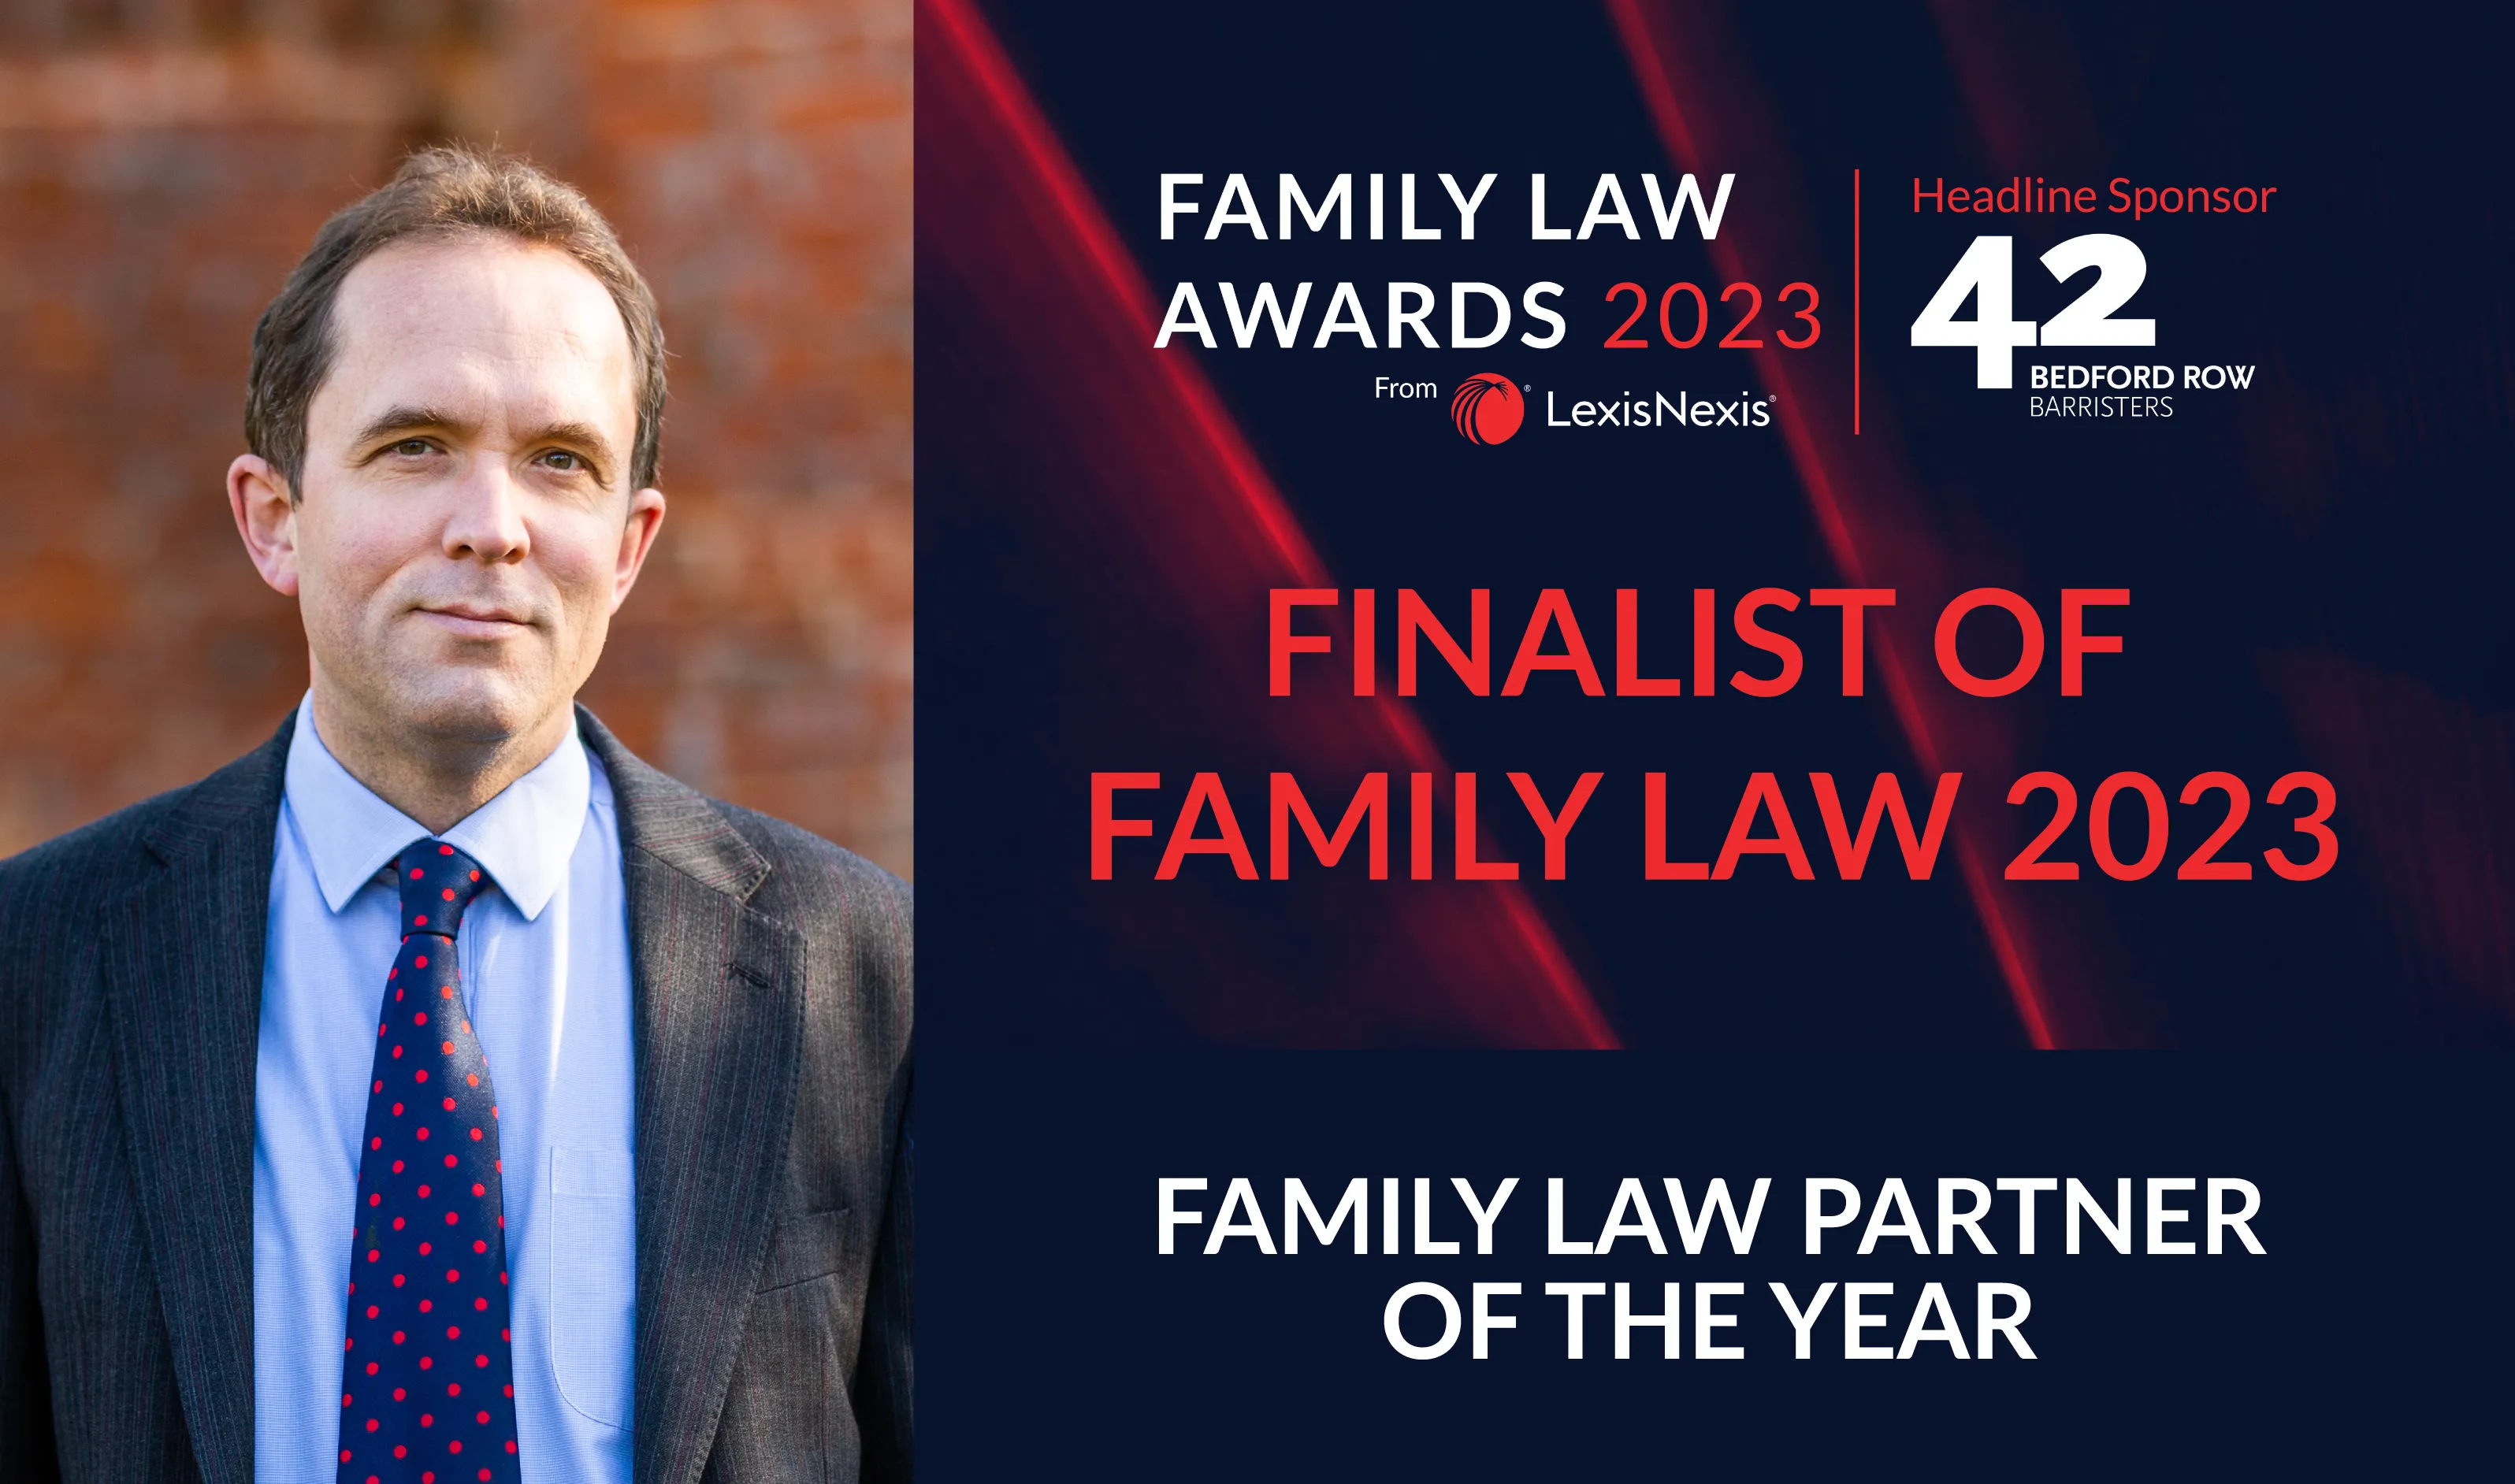 Edward Cooke shortlisted for Family Law Partner of the Year Award 2023